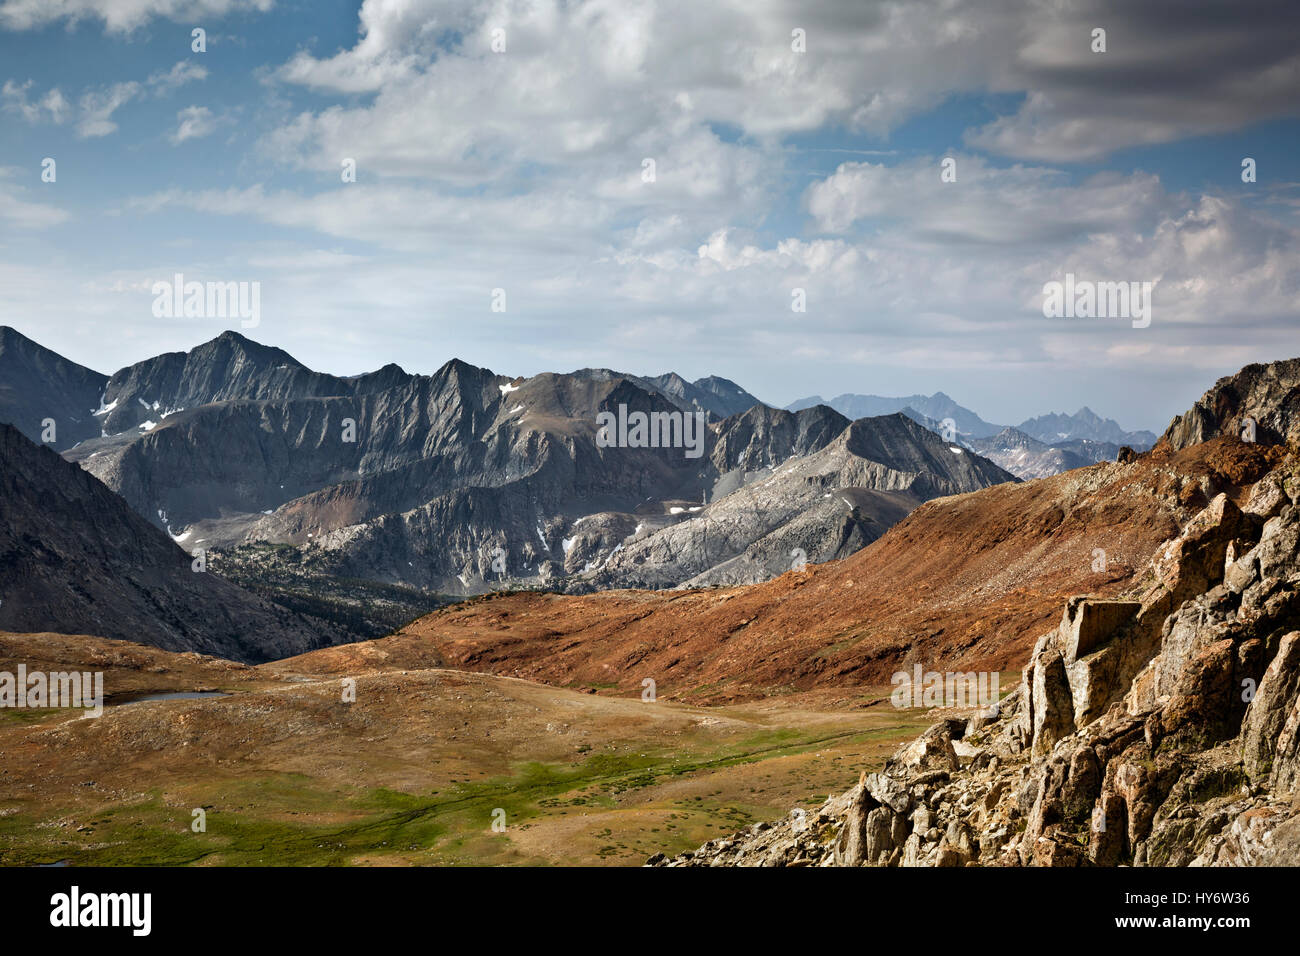 CA03167-00...CALIFORNIA - View over the south side of Pinchot Pass located along the route of the combined JMT/PCT in the High Sierra Mountains area o Stock Photo